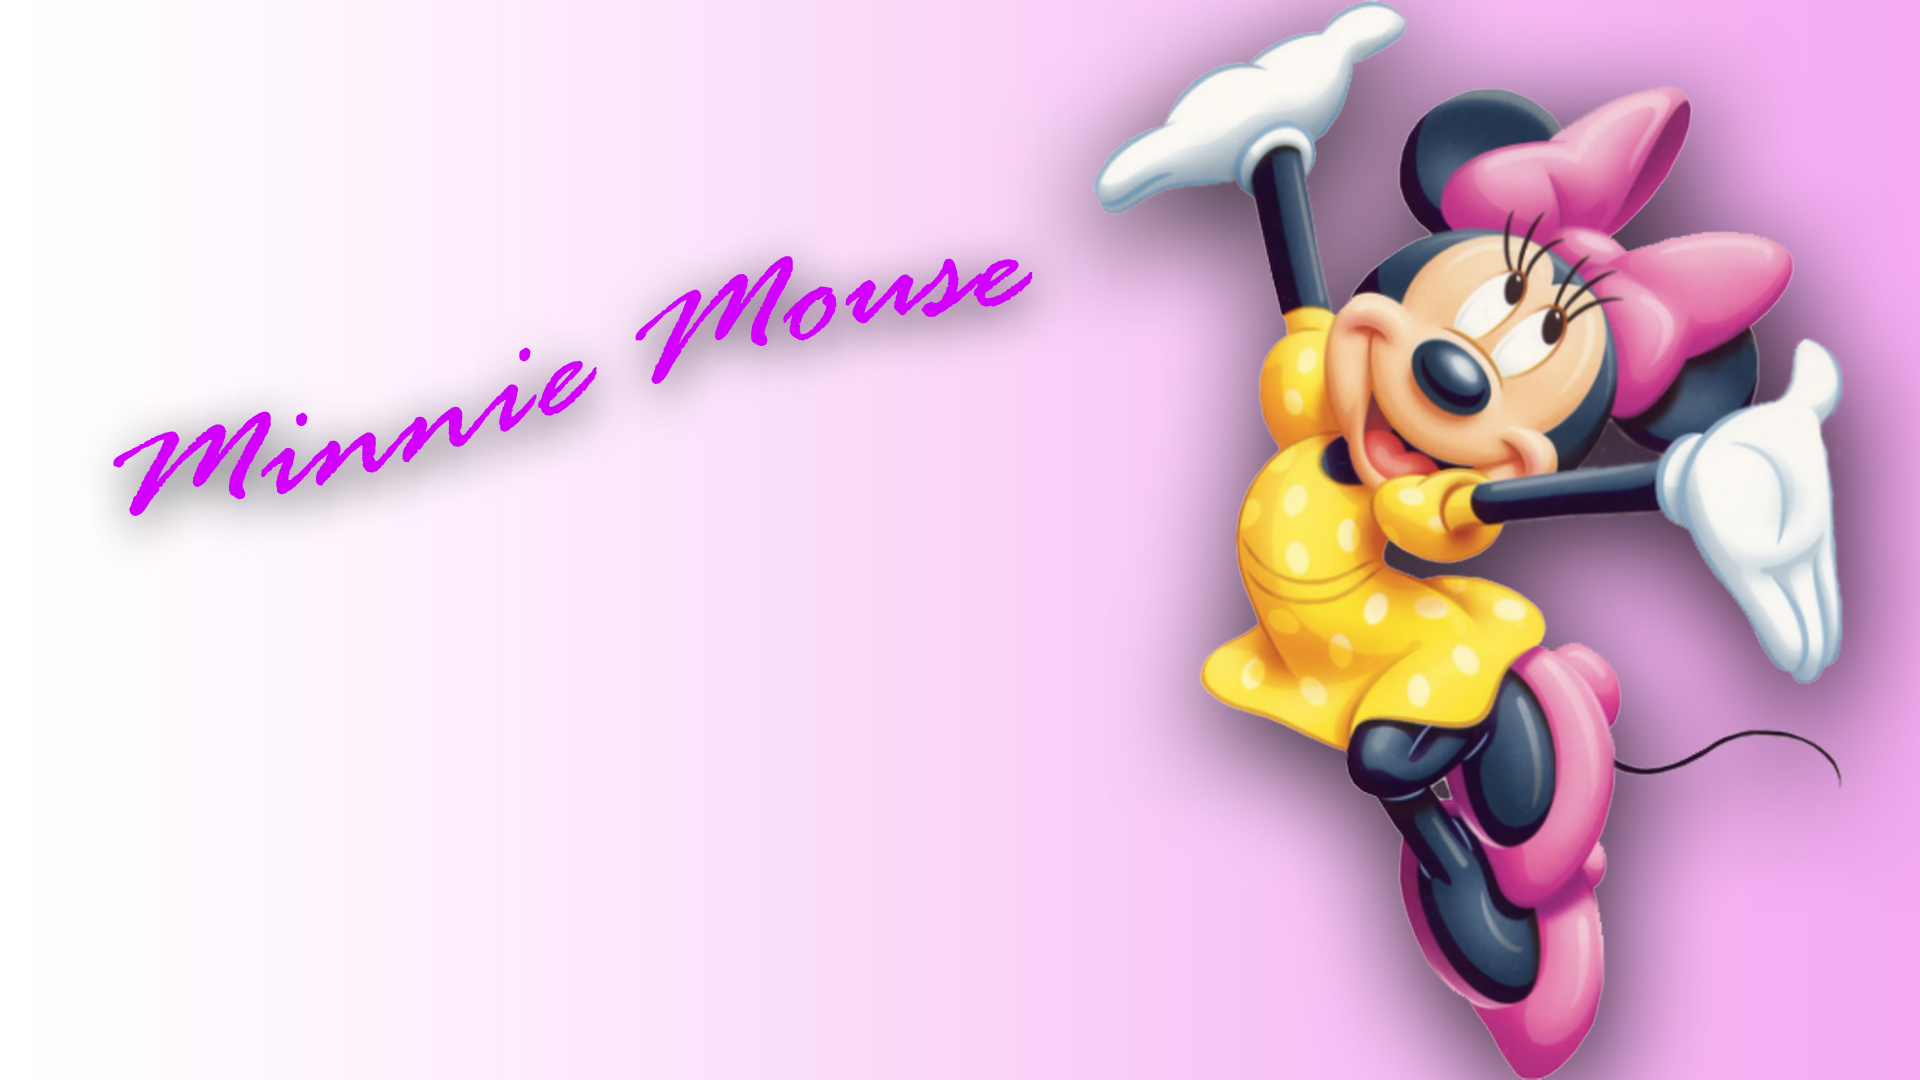 Right click the HD 1920 x 1080 Minnie Mouse wallpaper image and choose